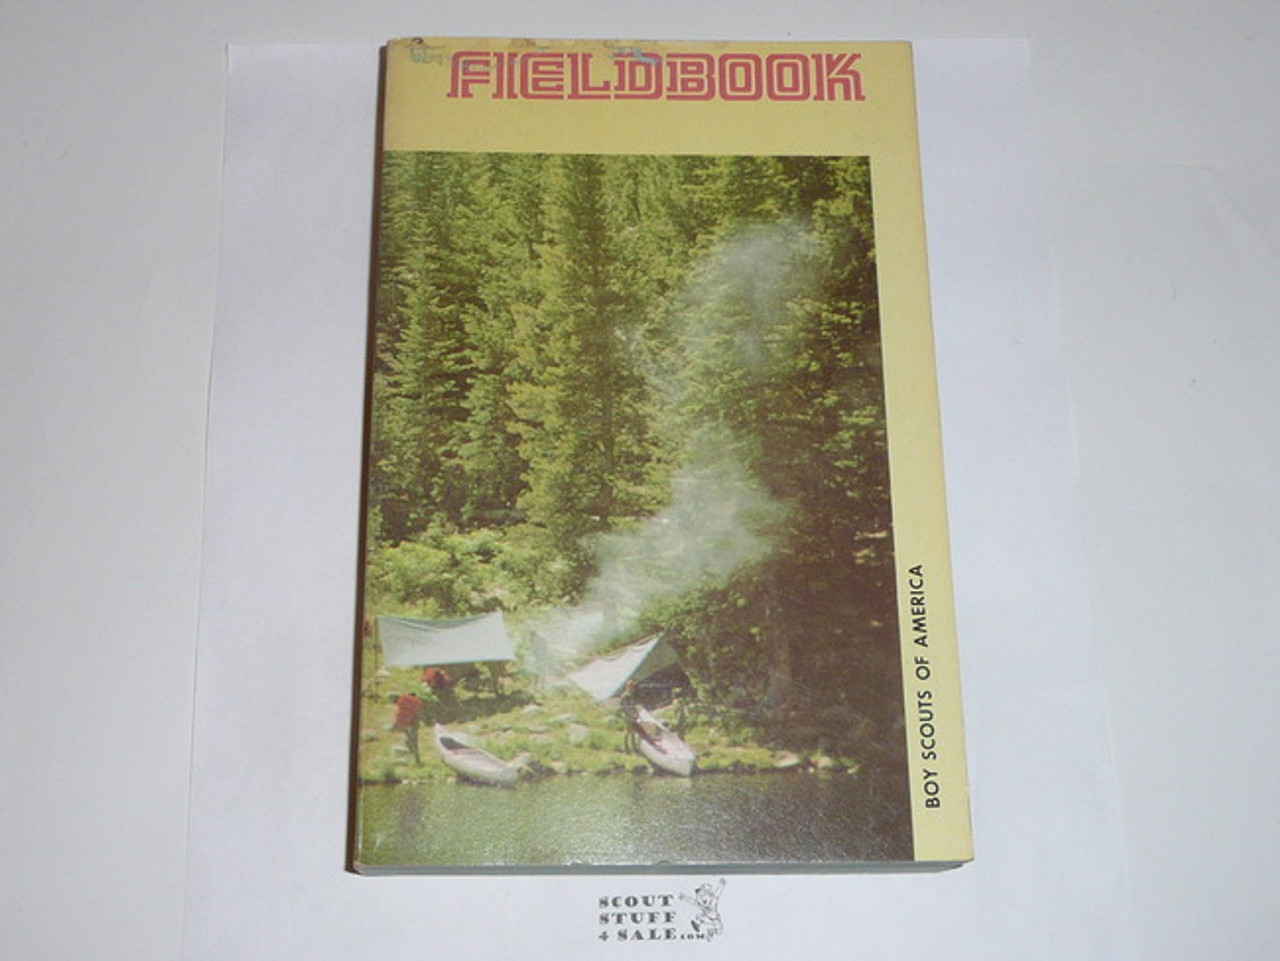 1980 Boy Scout Field Book, Second Edition, July 1980 Printing, near MINT condition